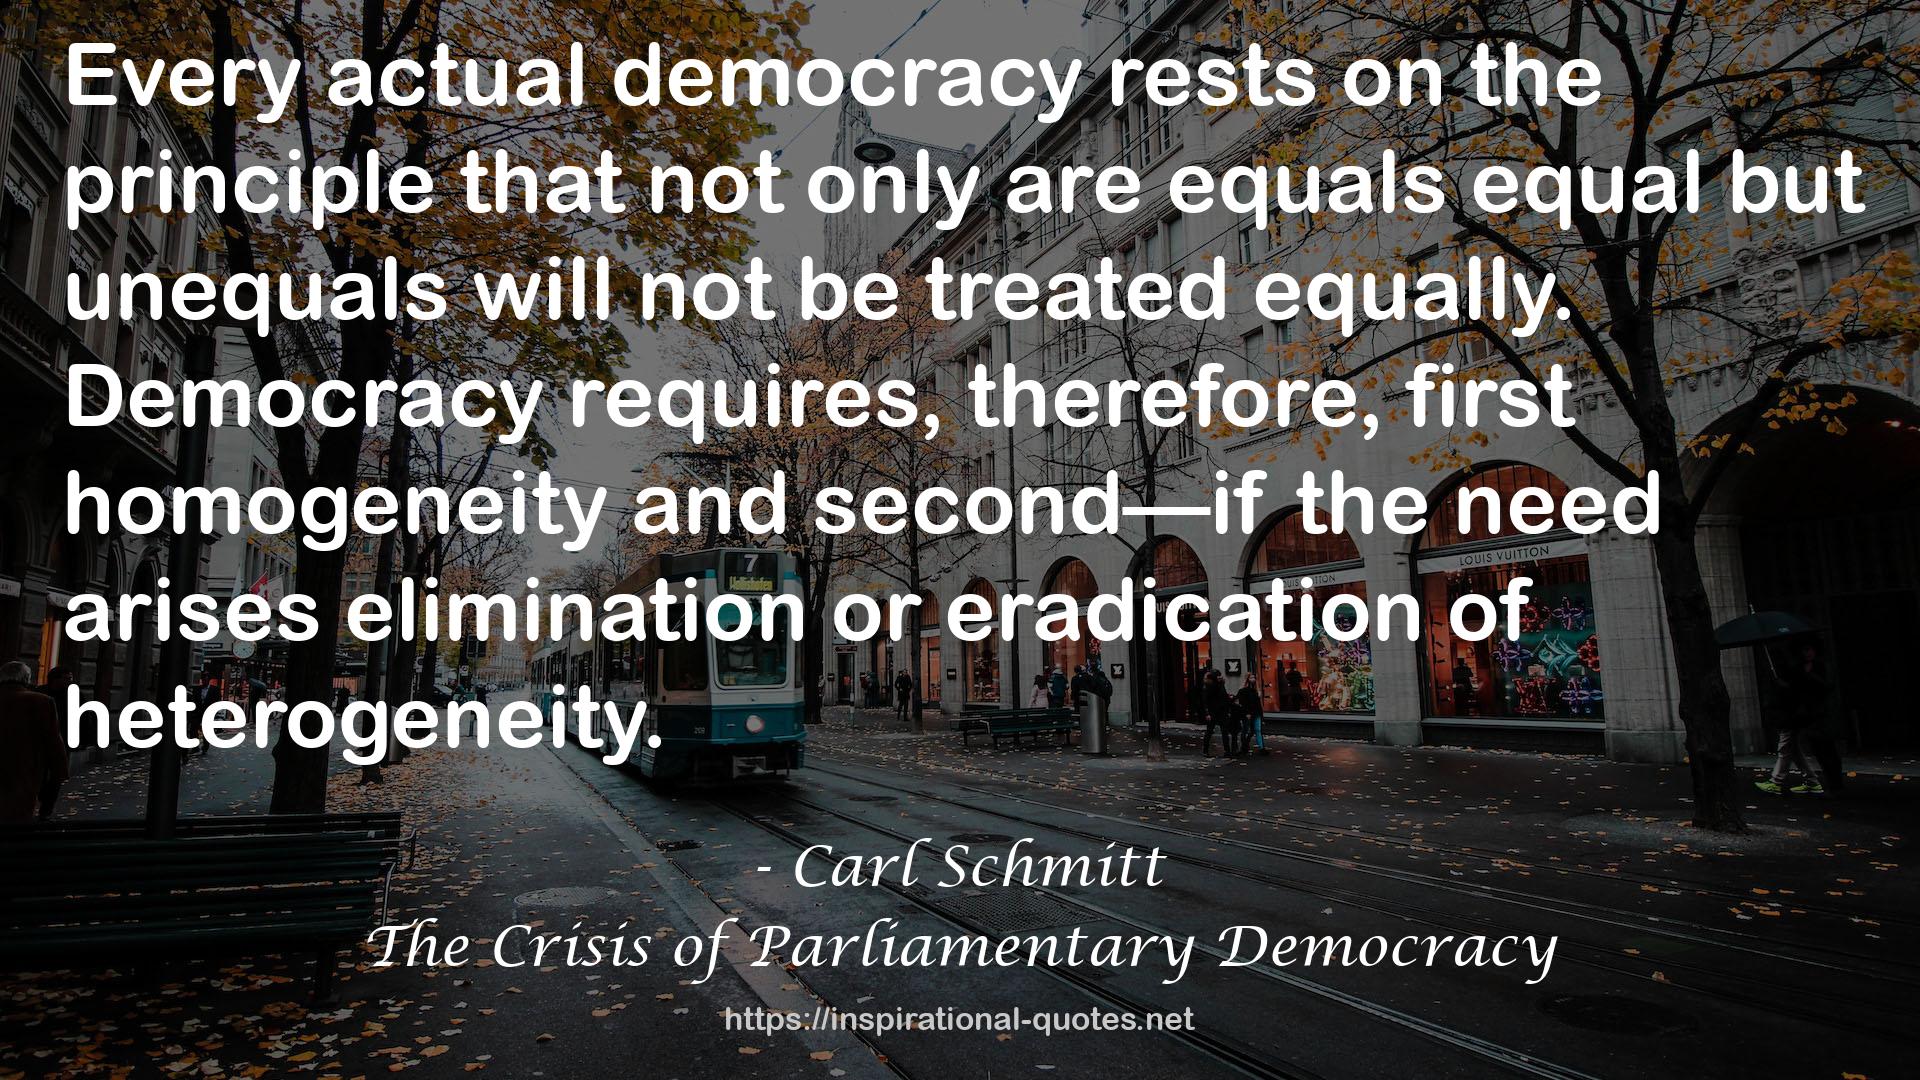 The Crisis of Parliamentary Democracy QUOTES